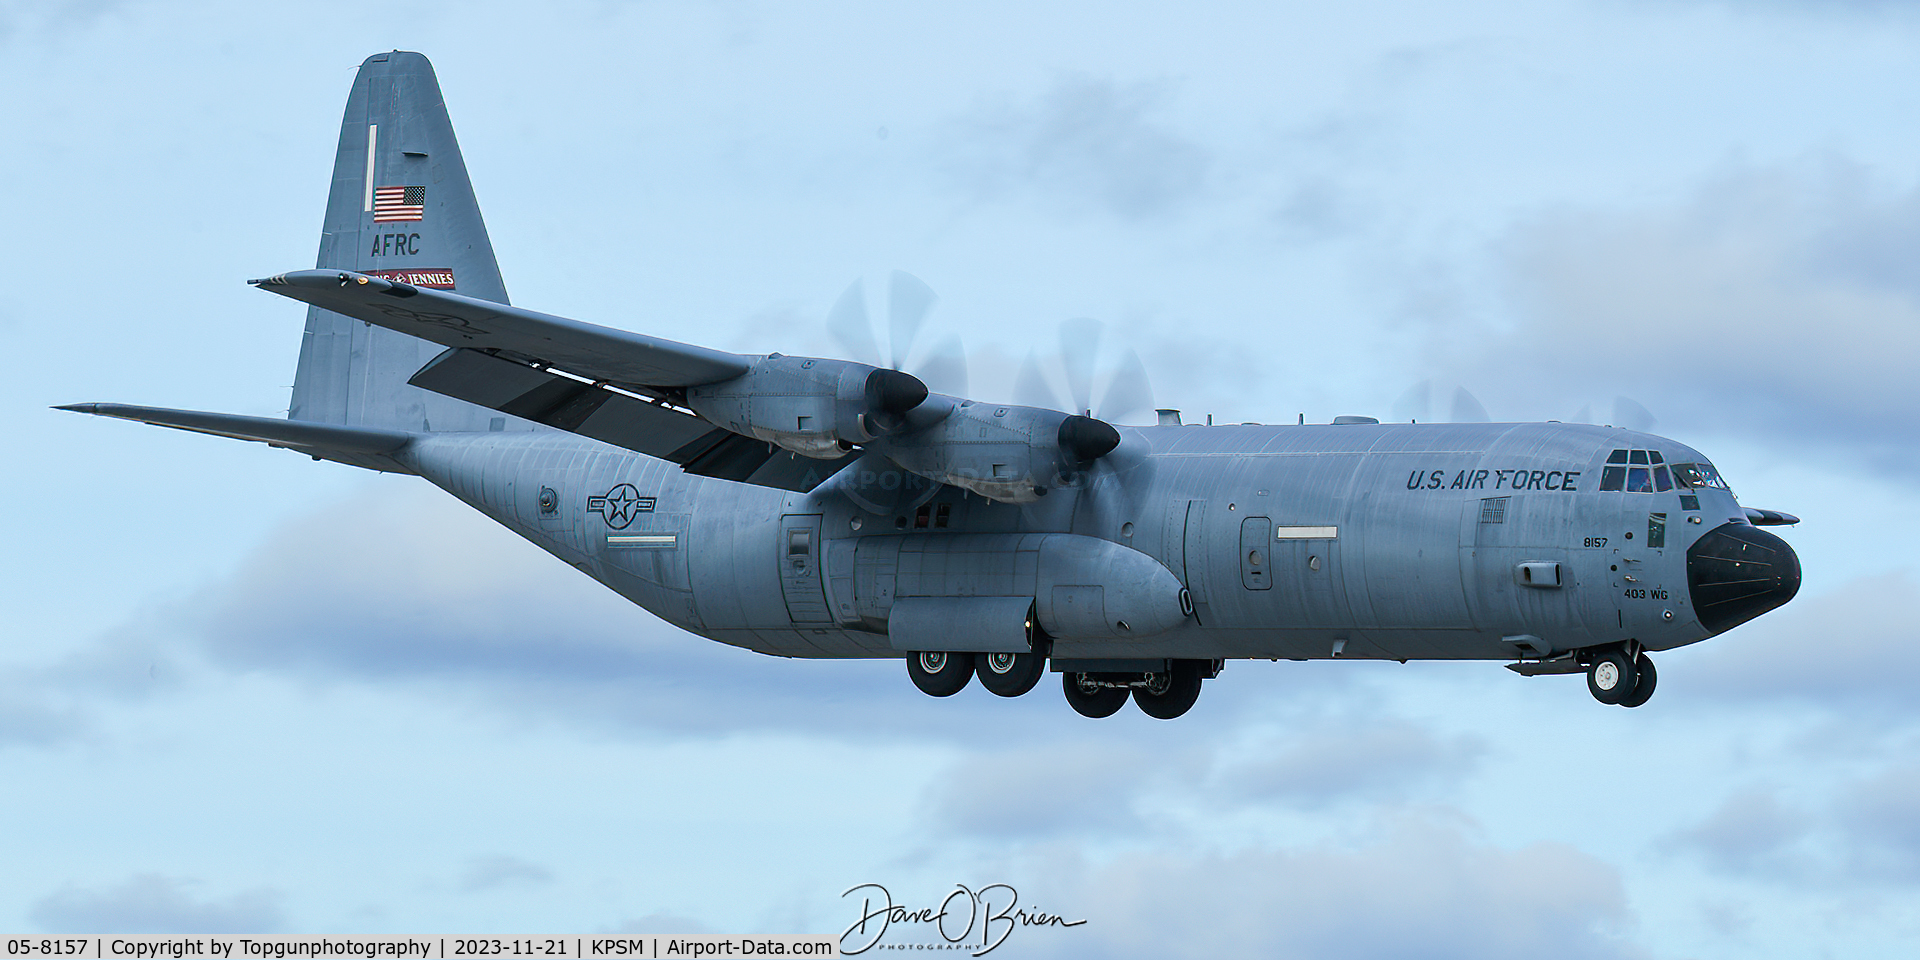 05-8157, 2005 Lockheed Martin C-130J-30 Super Hercules C/N 382-5570, REACH465 completes the 4 ship of Keesler Hercs that came in to land